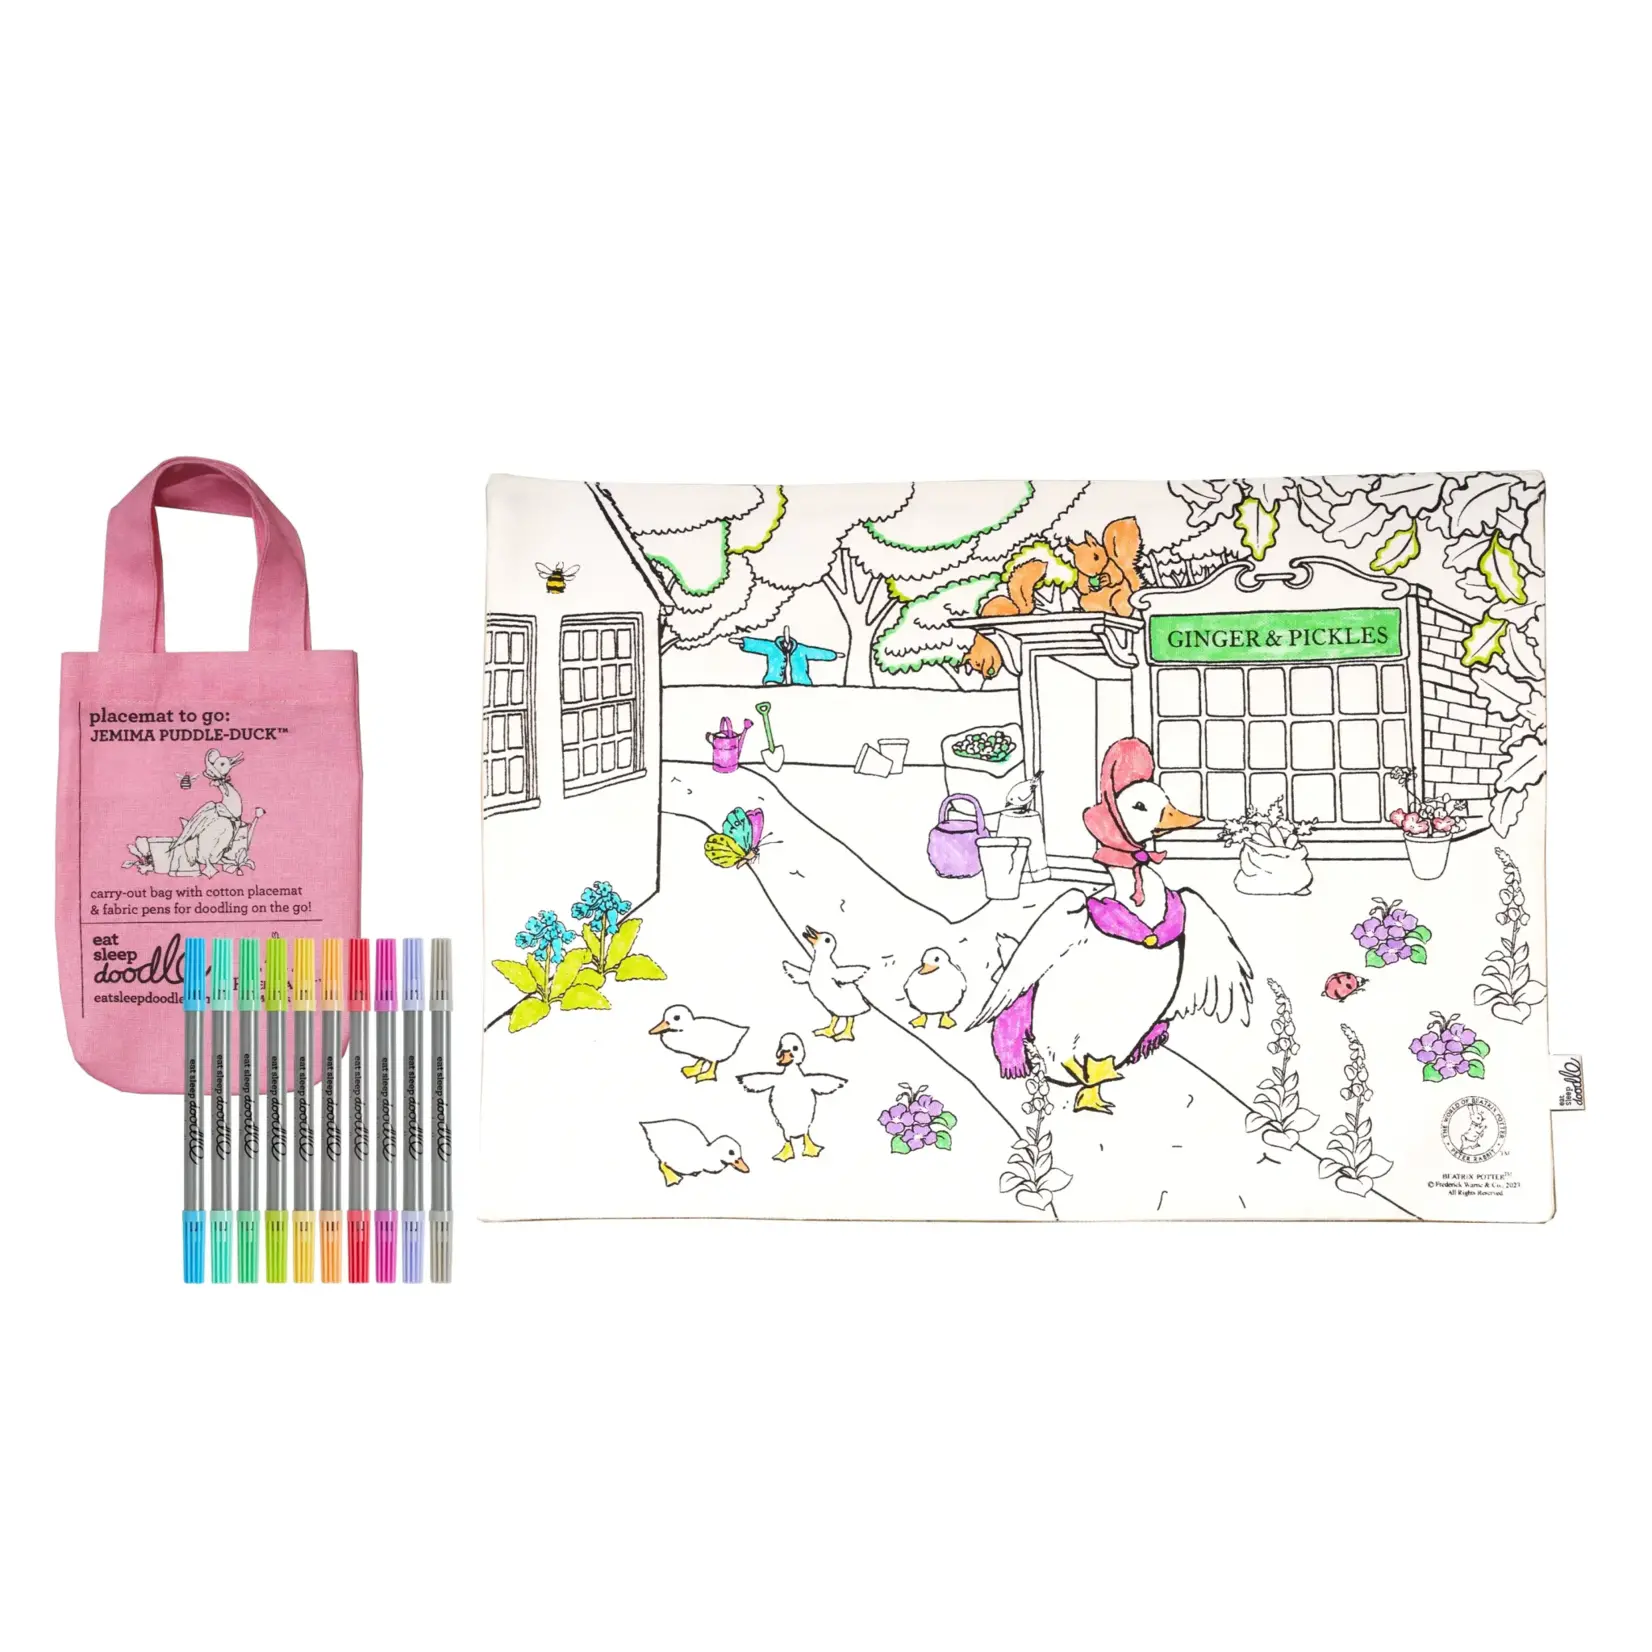 Eat Sleep Doodle Jemima Puddle-duck placemat to go - colour in & learn